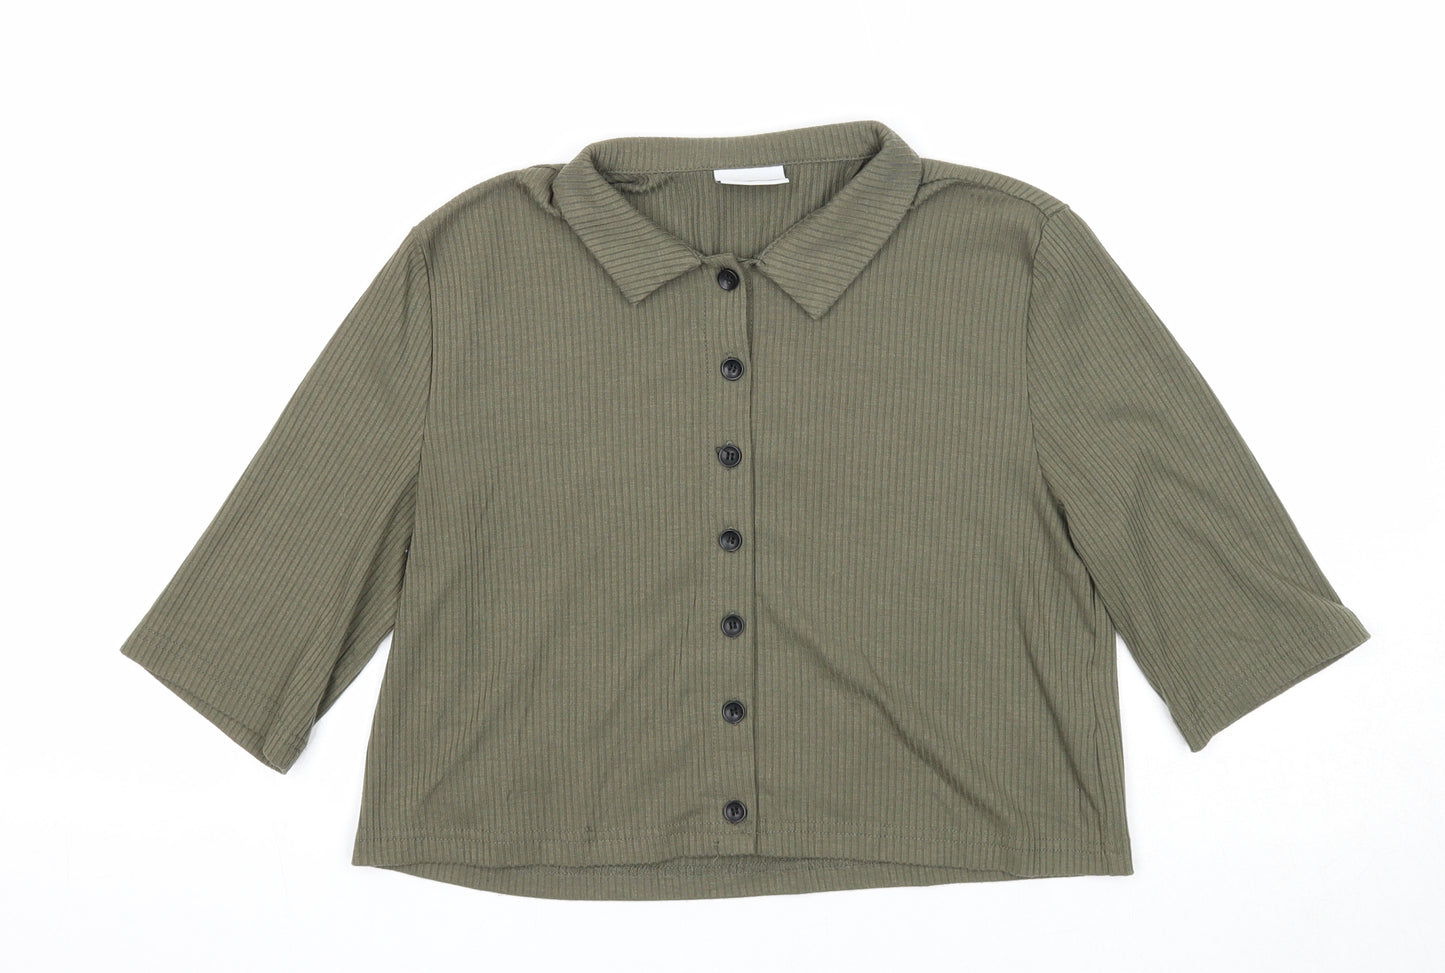 Noisy may Womens Green Polyester Basic Button-Up Size S Collared